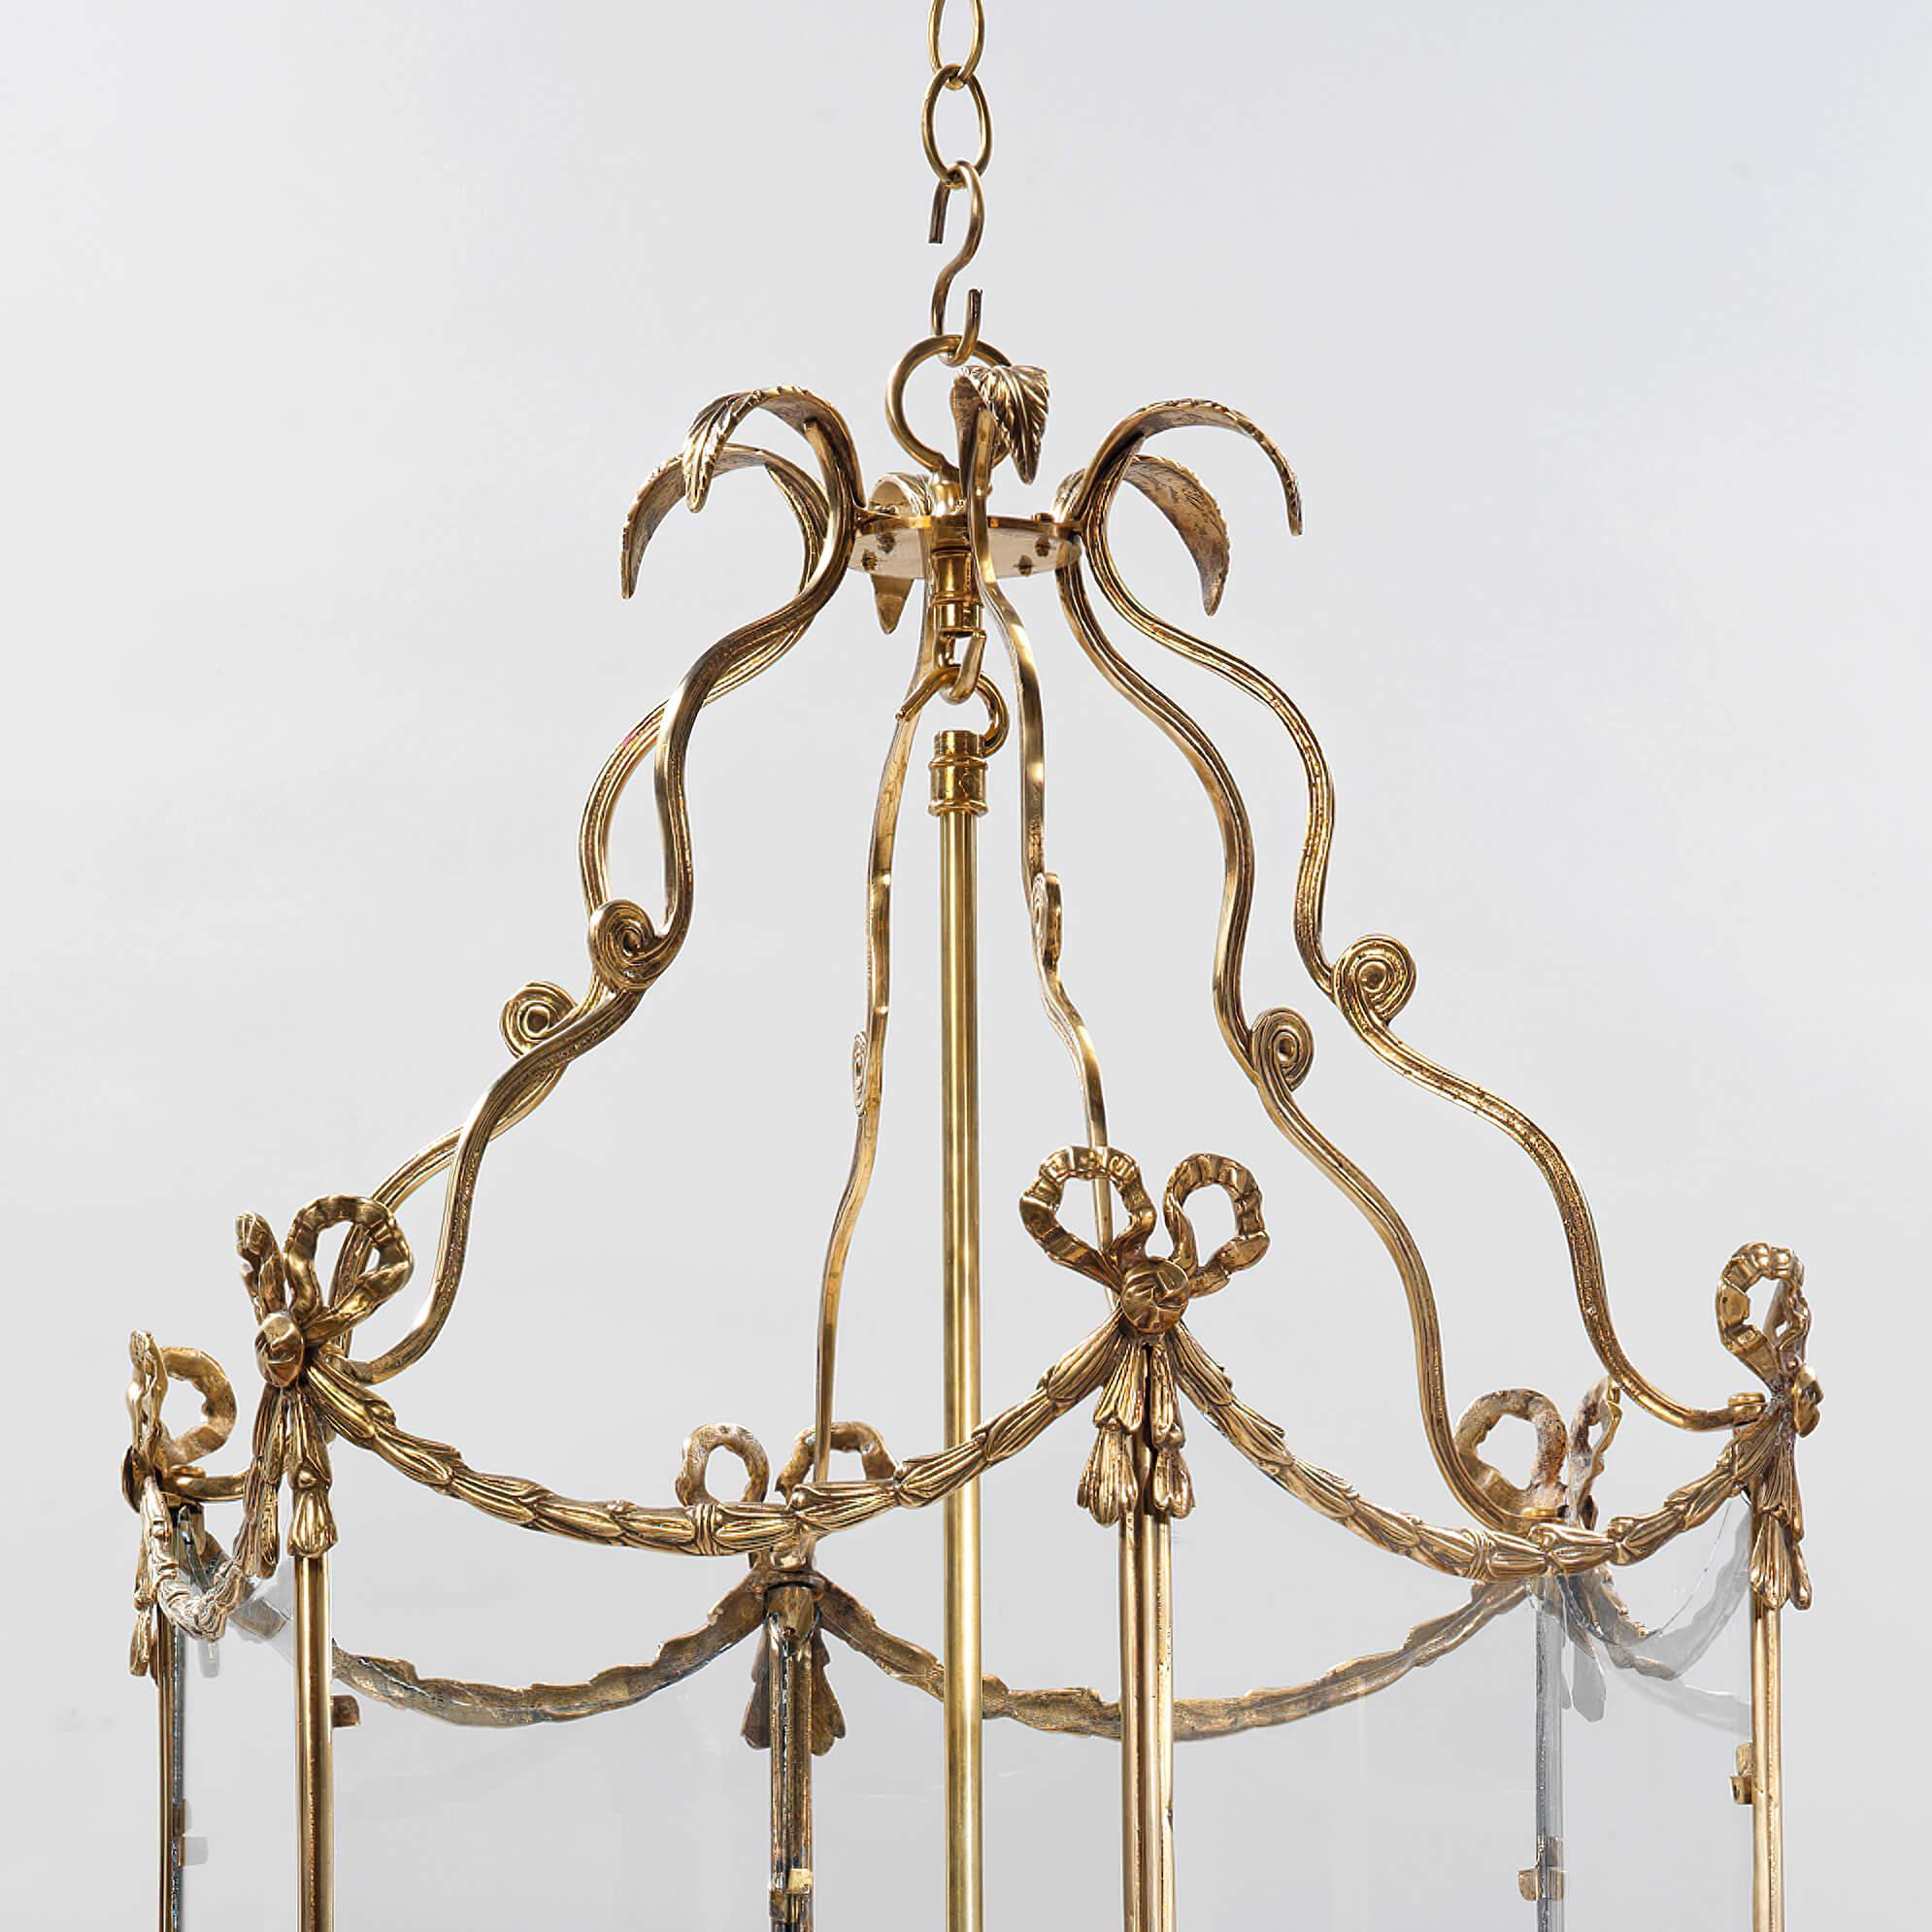 The Swedish neoclassic style three-light brass hall lantern with 18th century style embellishments. The leaf tip crown above scrolling supports and a hexagonal frame decorated with bowknots, tassels, and bellflower swags. The base decorated with